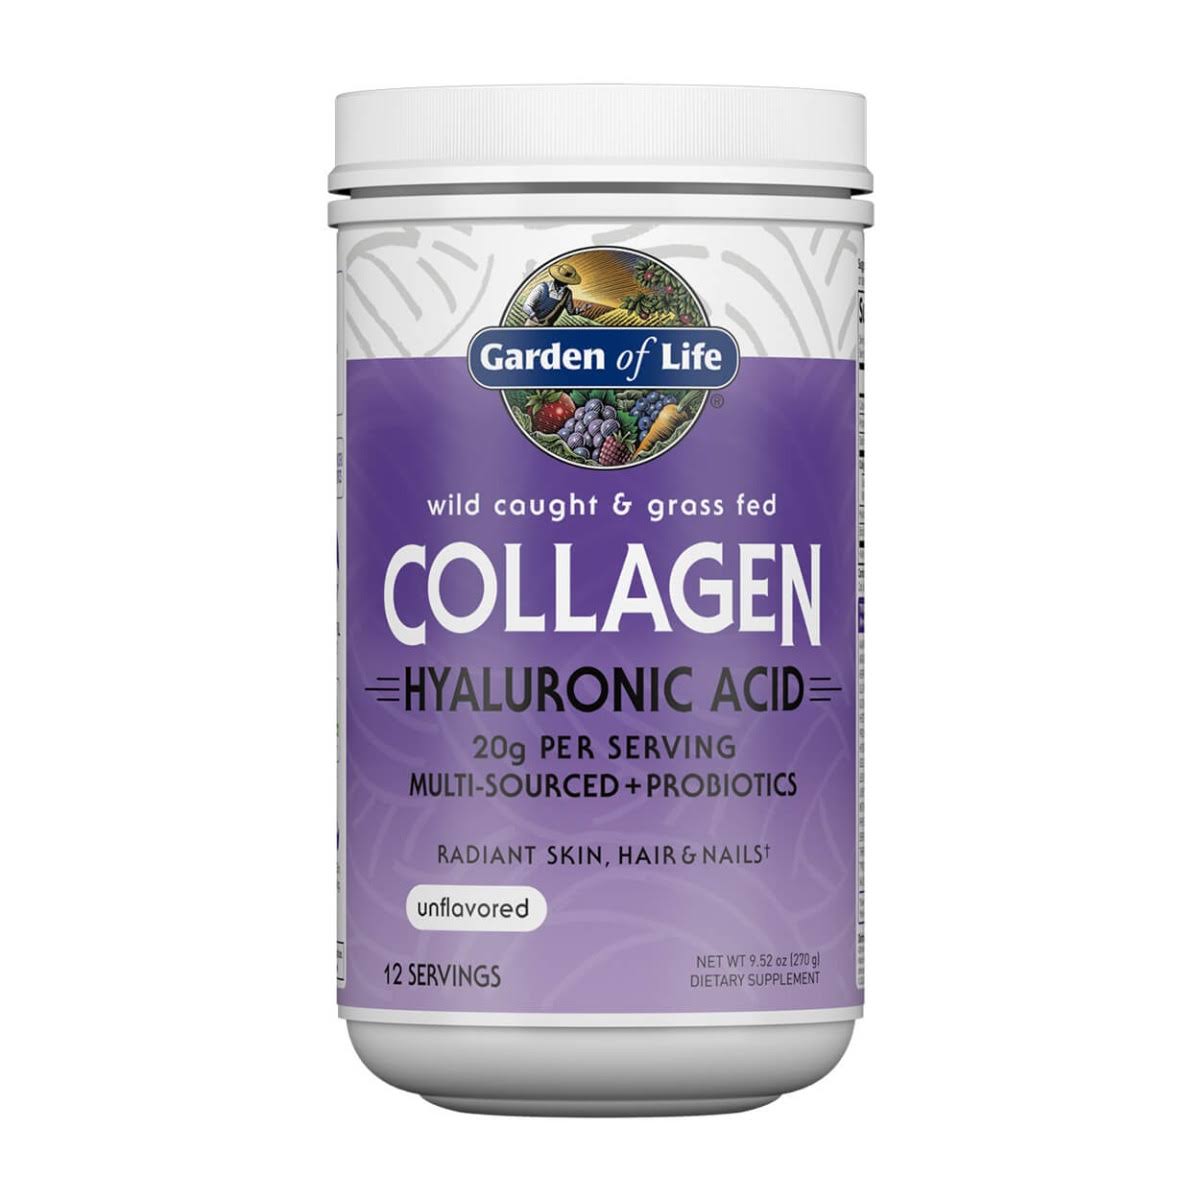 Garden of Life, Wild Caught & Grass Fed Collagen, Hyaluronic Acid, Unflavored